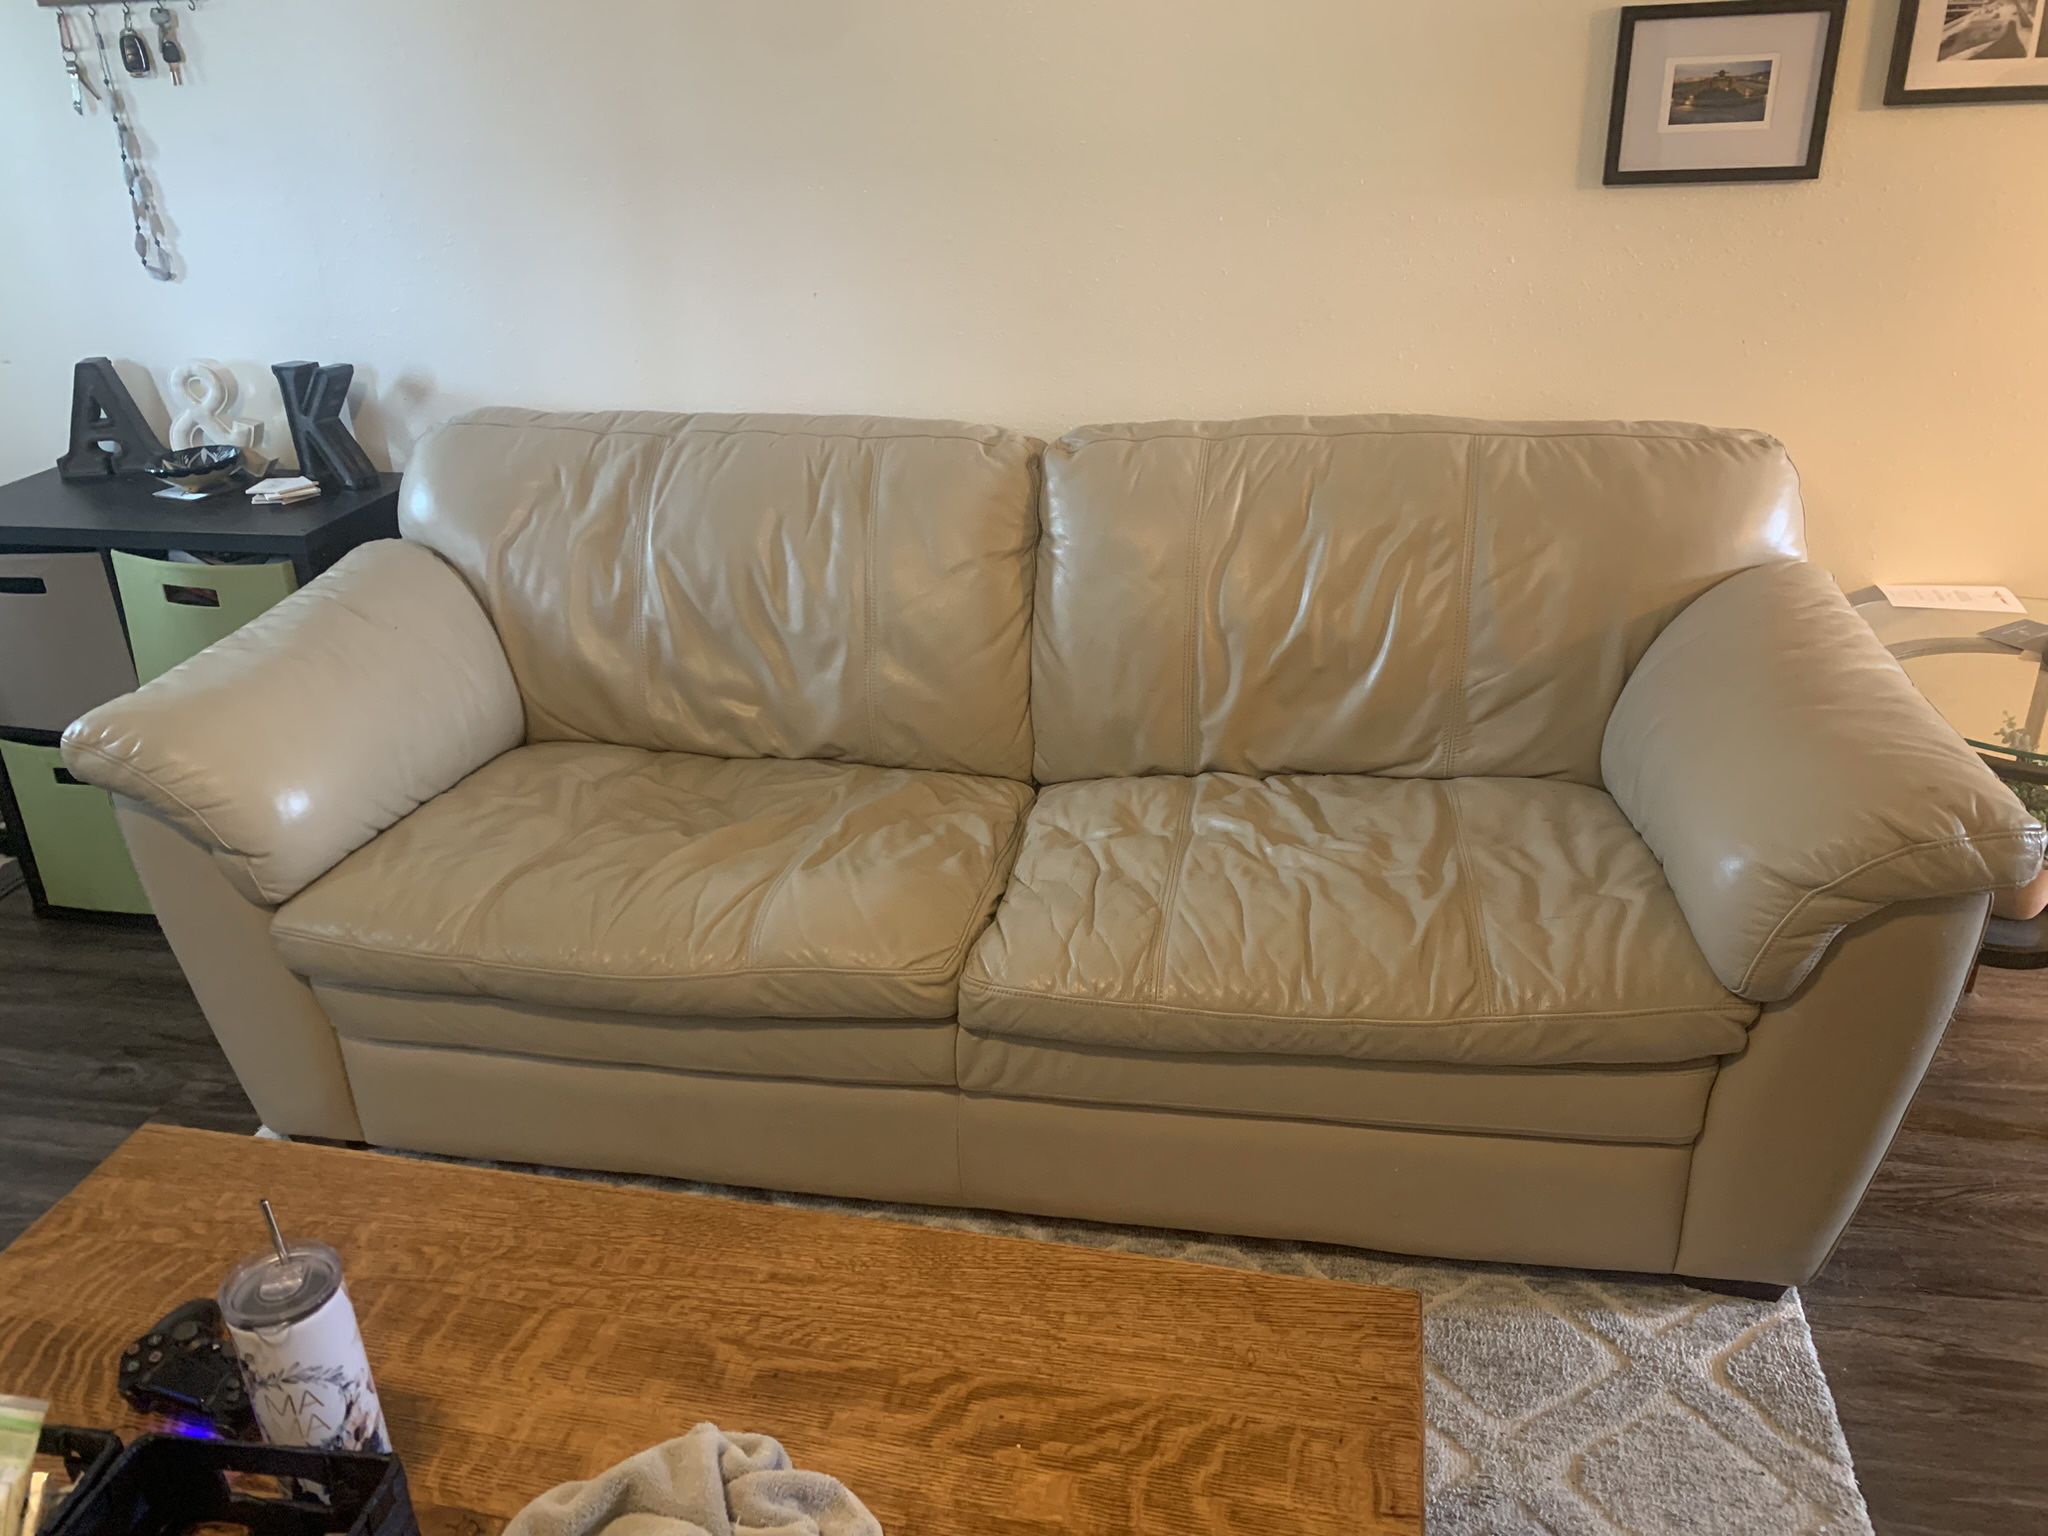 Couch and Chairs 